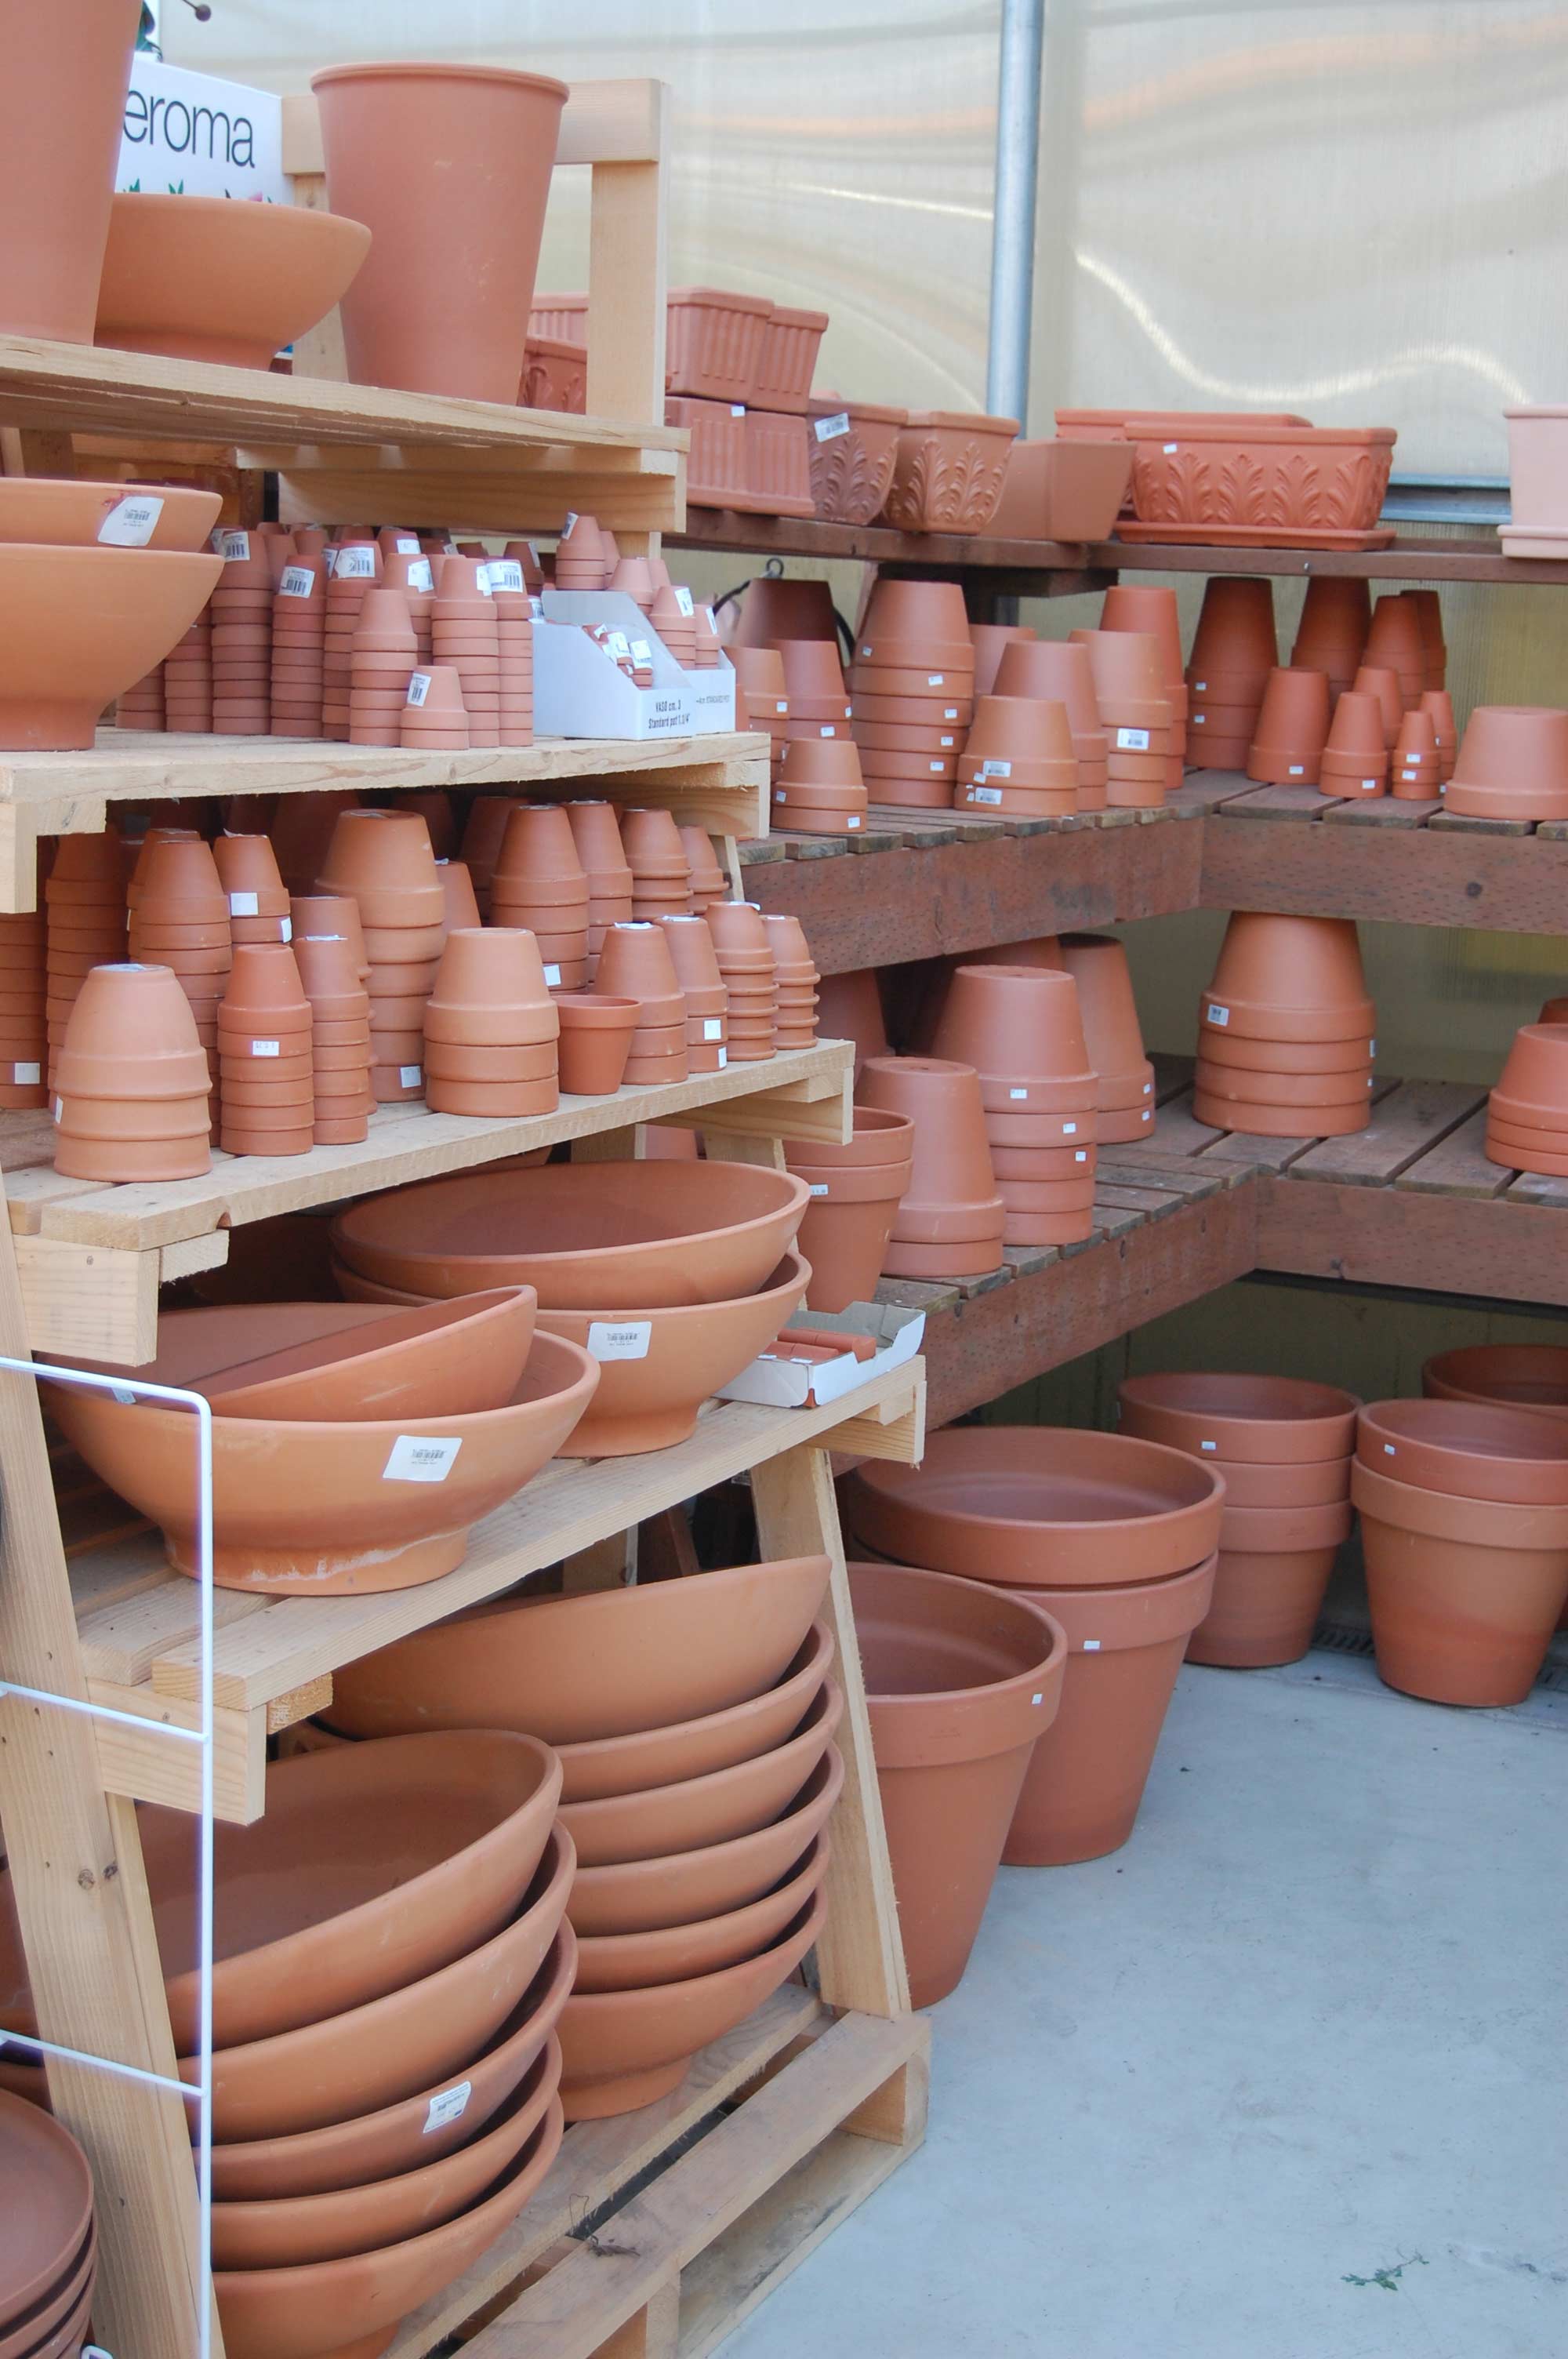 A 5-tiered shelf filled with pottery of various shapes and sizes.